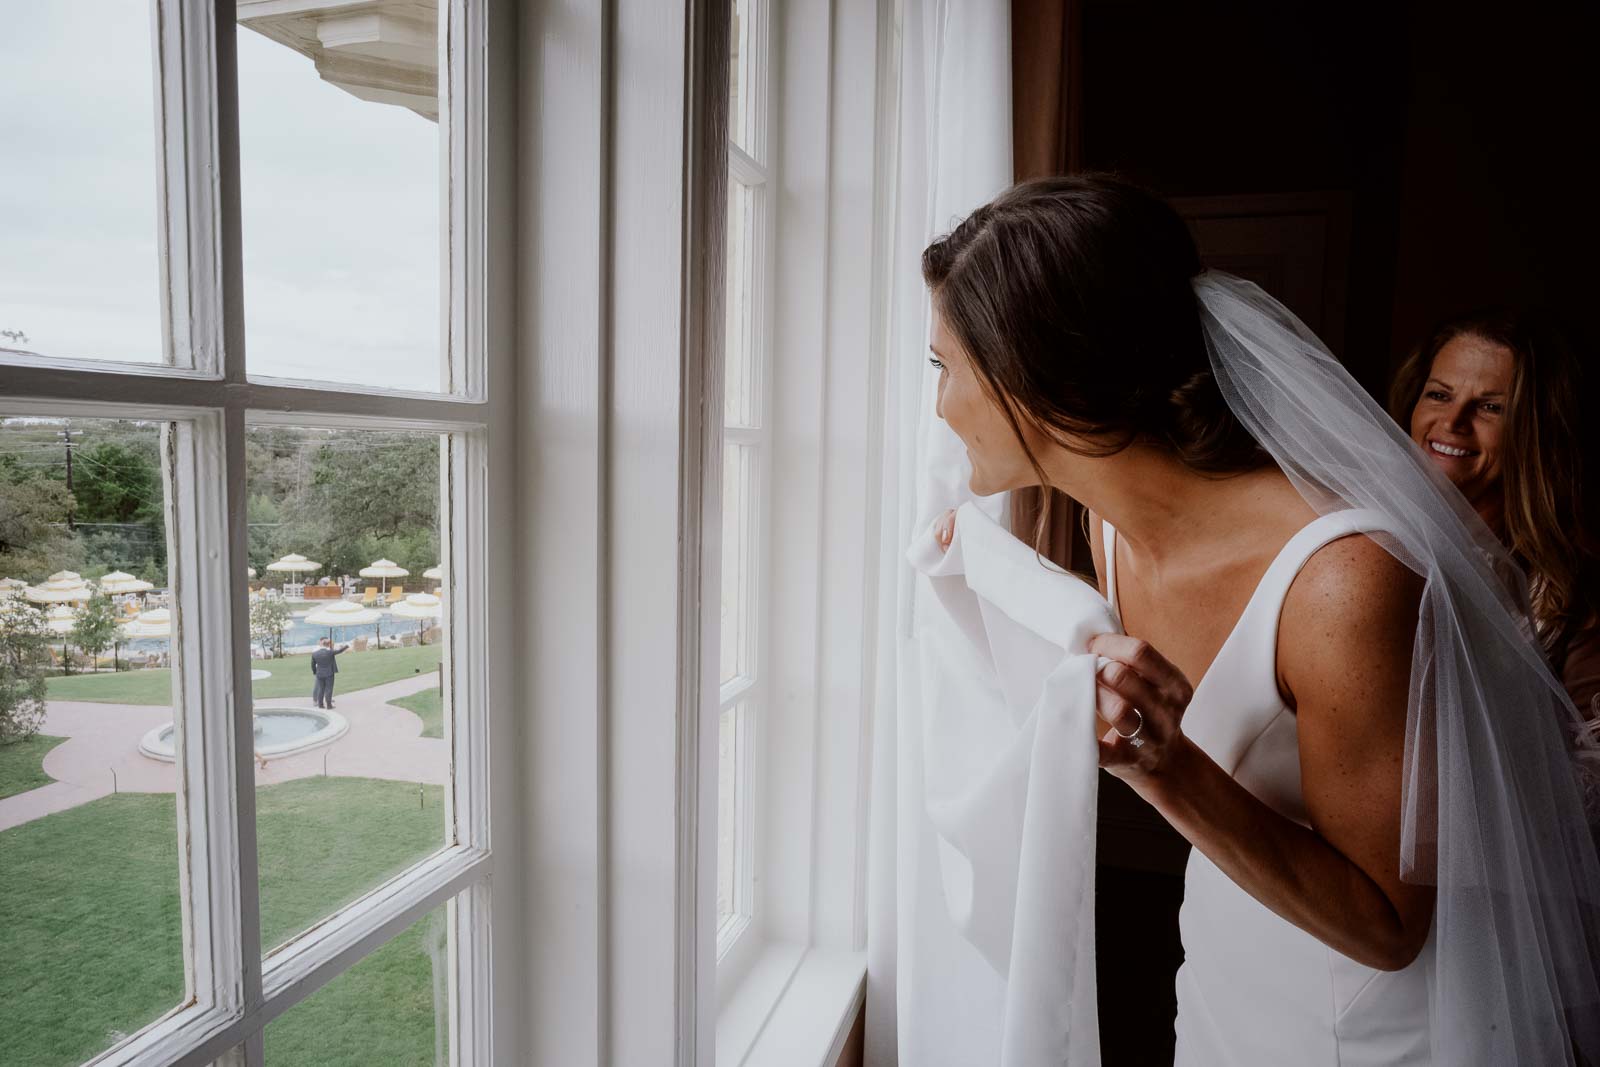 Bride looks out and sees the groom before wedding ceremony